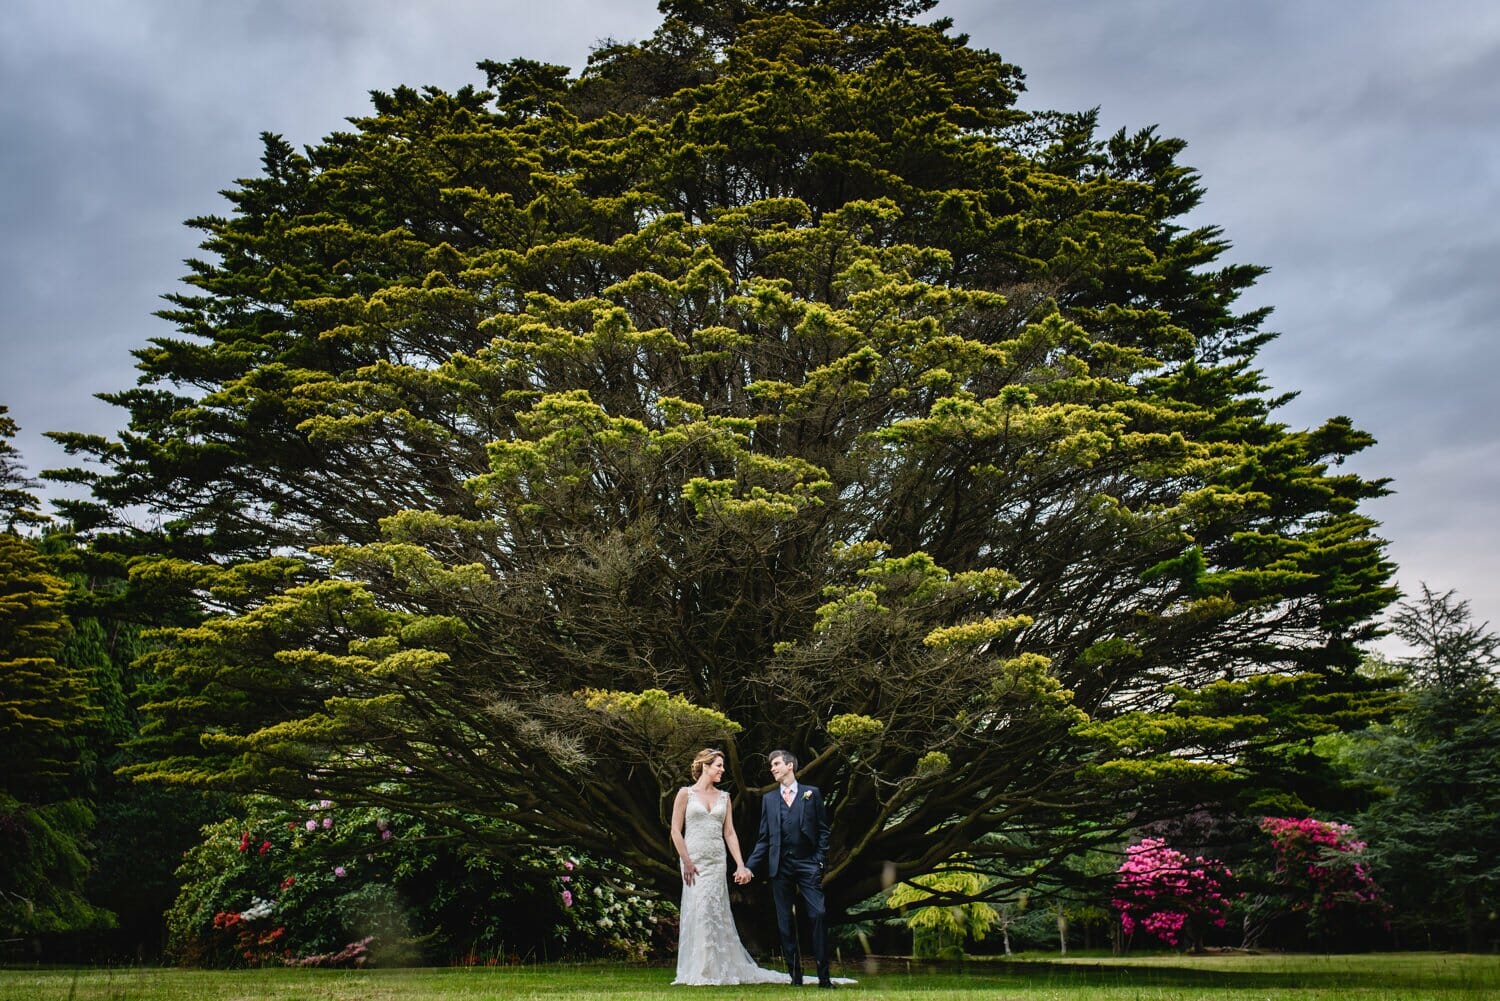 Studland Bay house Yew tree with bride and Groom